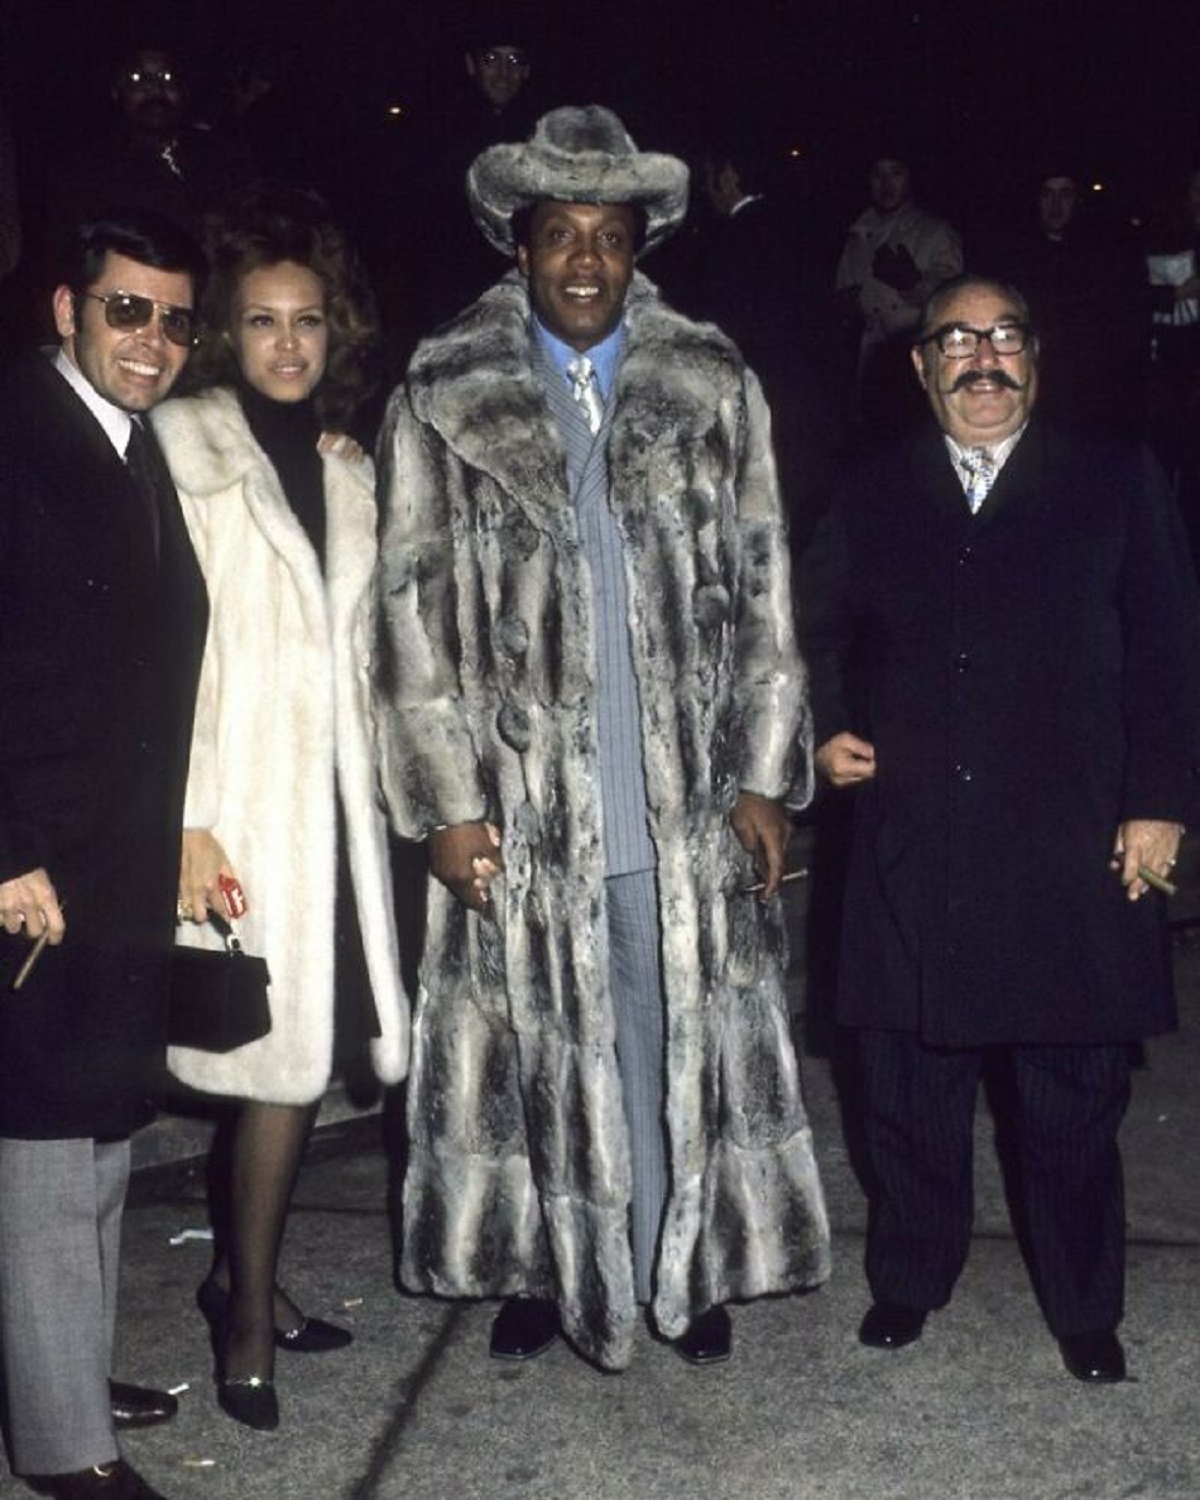 Frank Lucas, The D Rug Lord Who Ruled Harlem In The 1970s, Was So Discreet That The Police Didn't Know Who He Was In 1971 When He Decided To Wear A $100,000 Full-Length Chinchilla Coat — To A Muhammad Ali Boxing Match